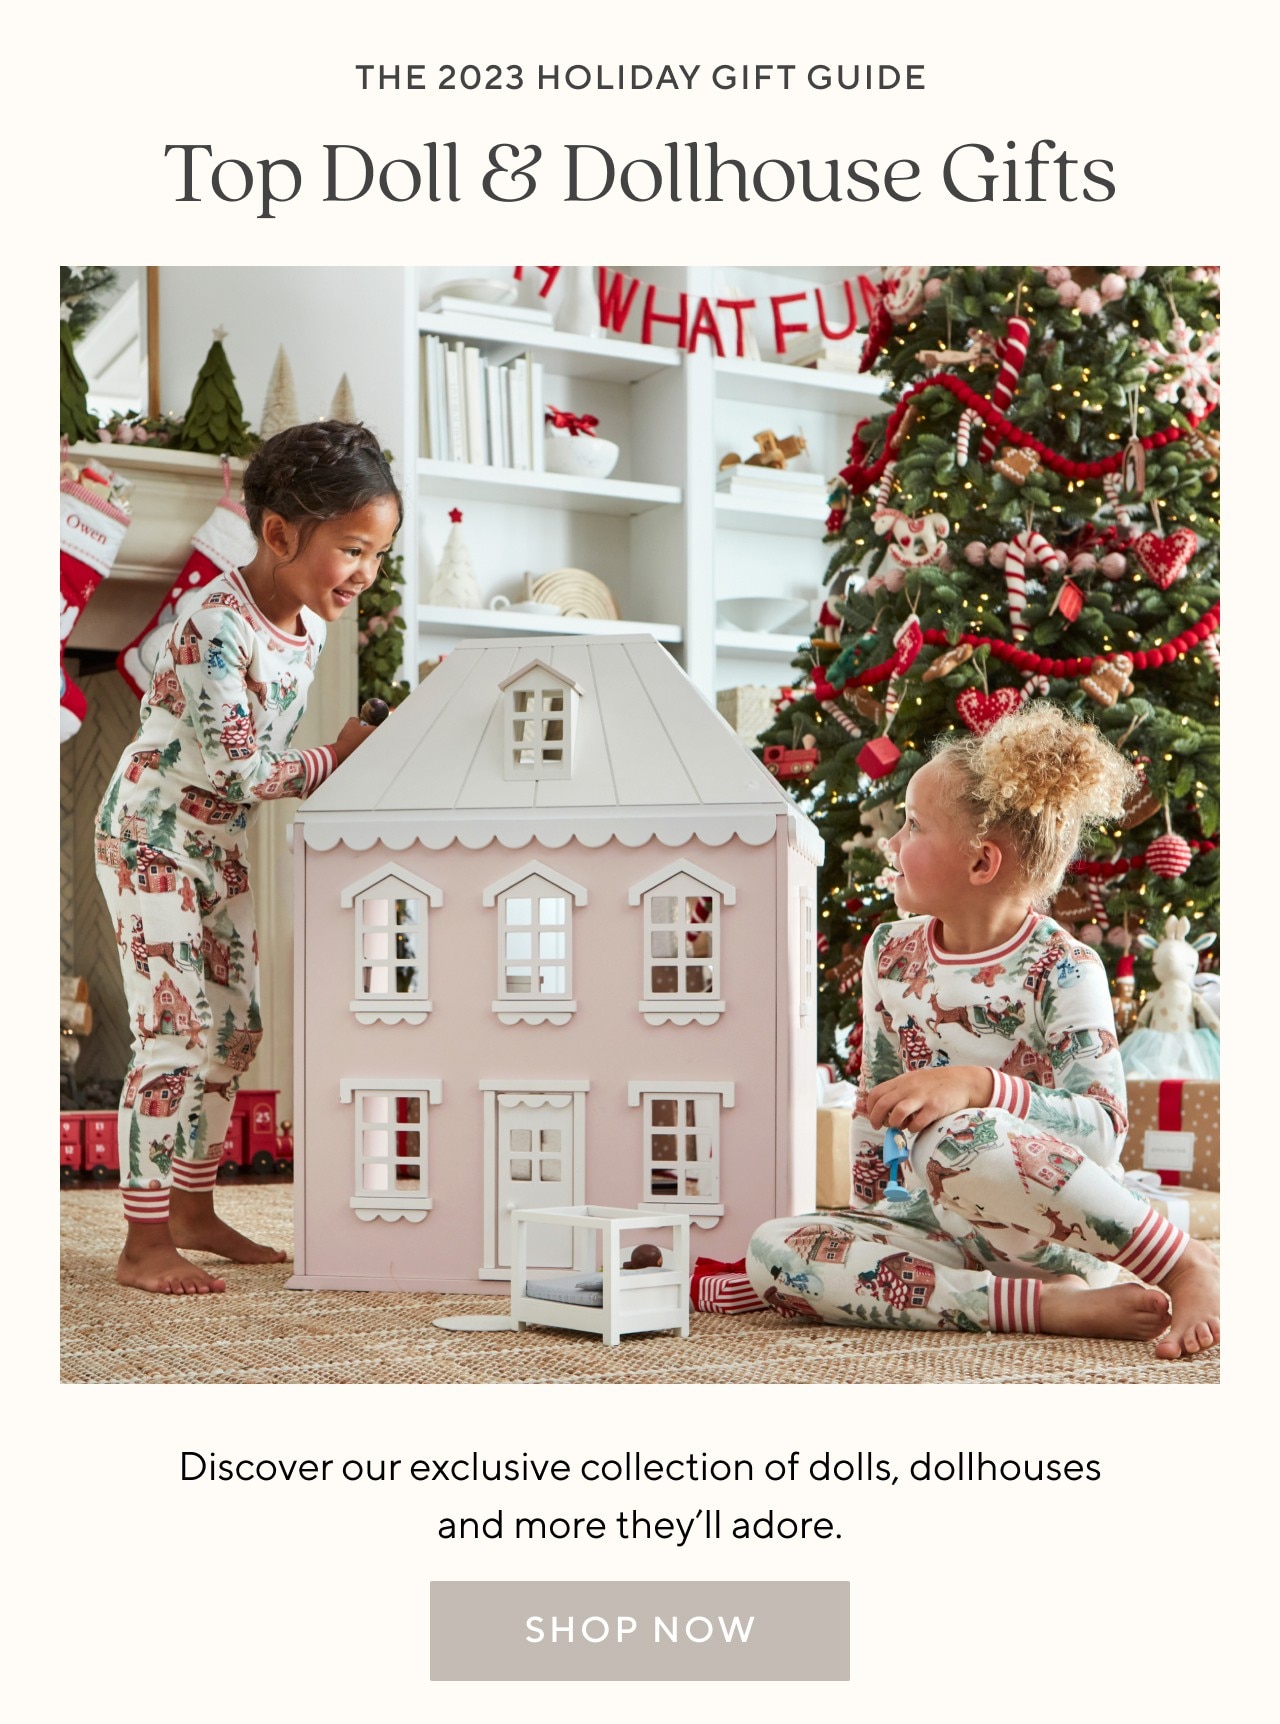 TOP DOLL & DOLLHOUSE GIFTS